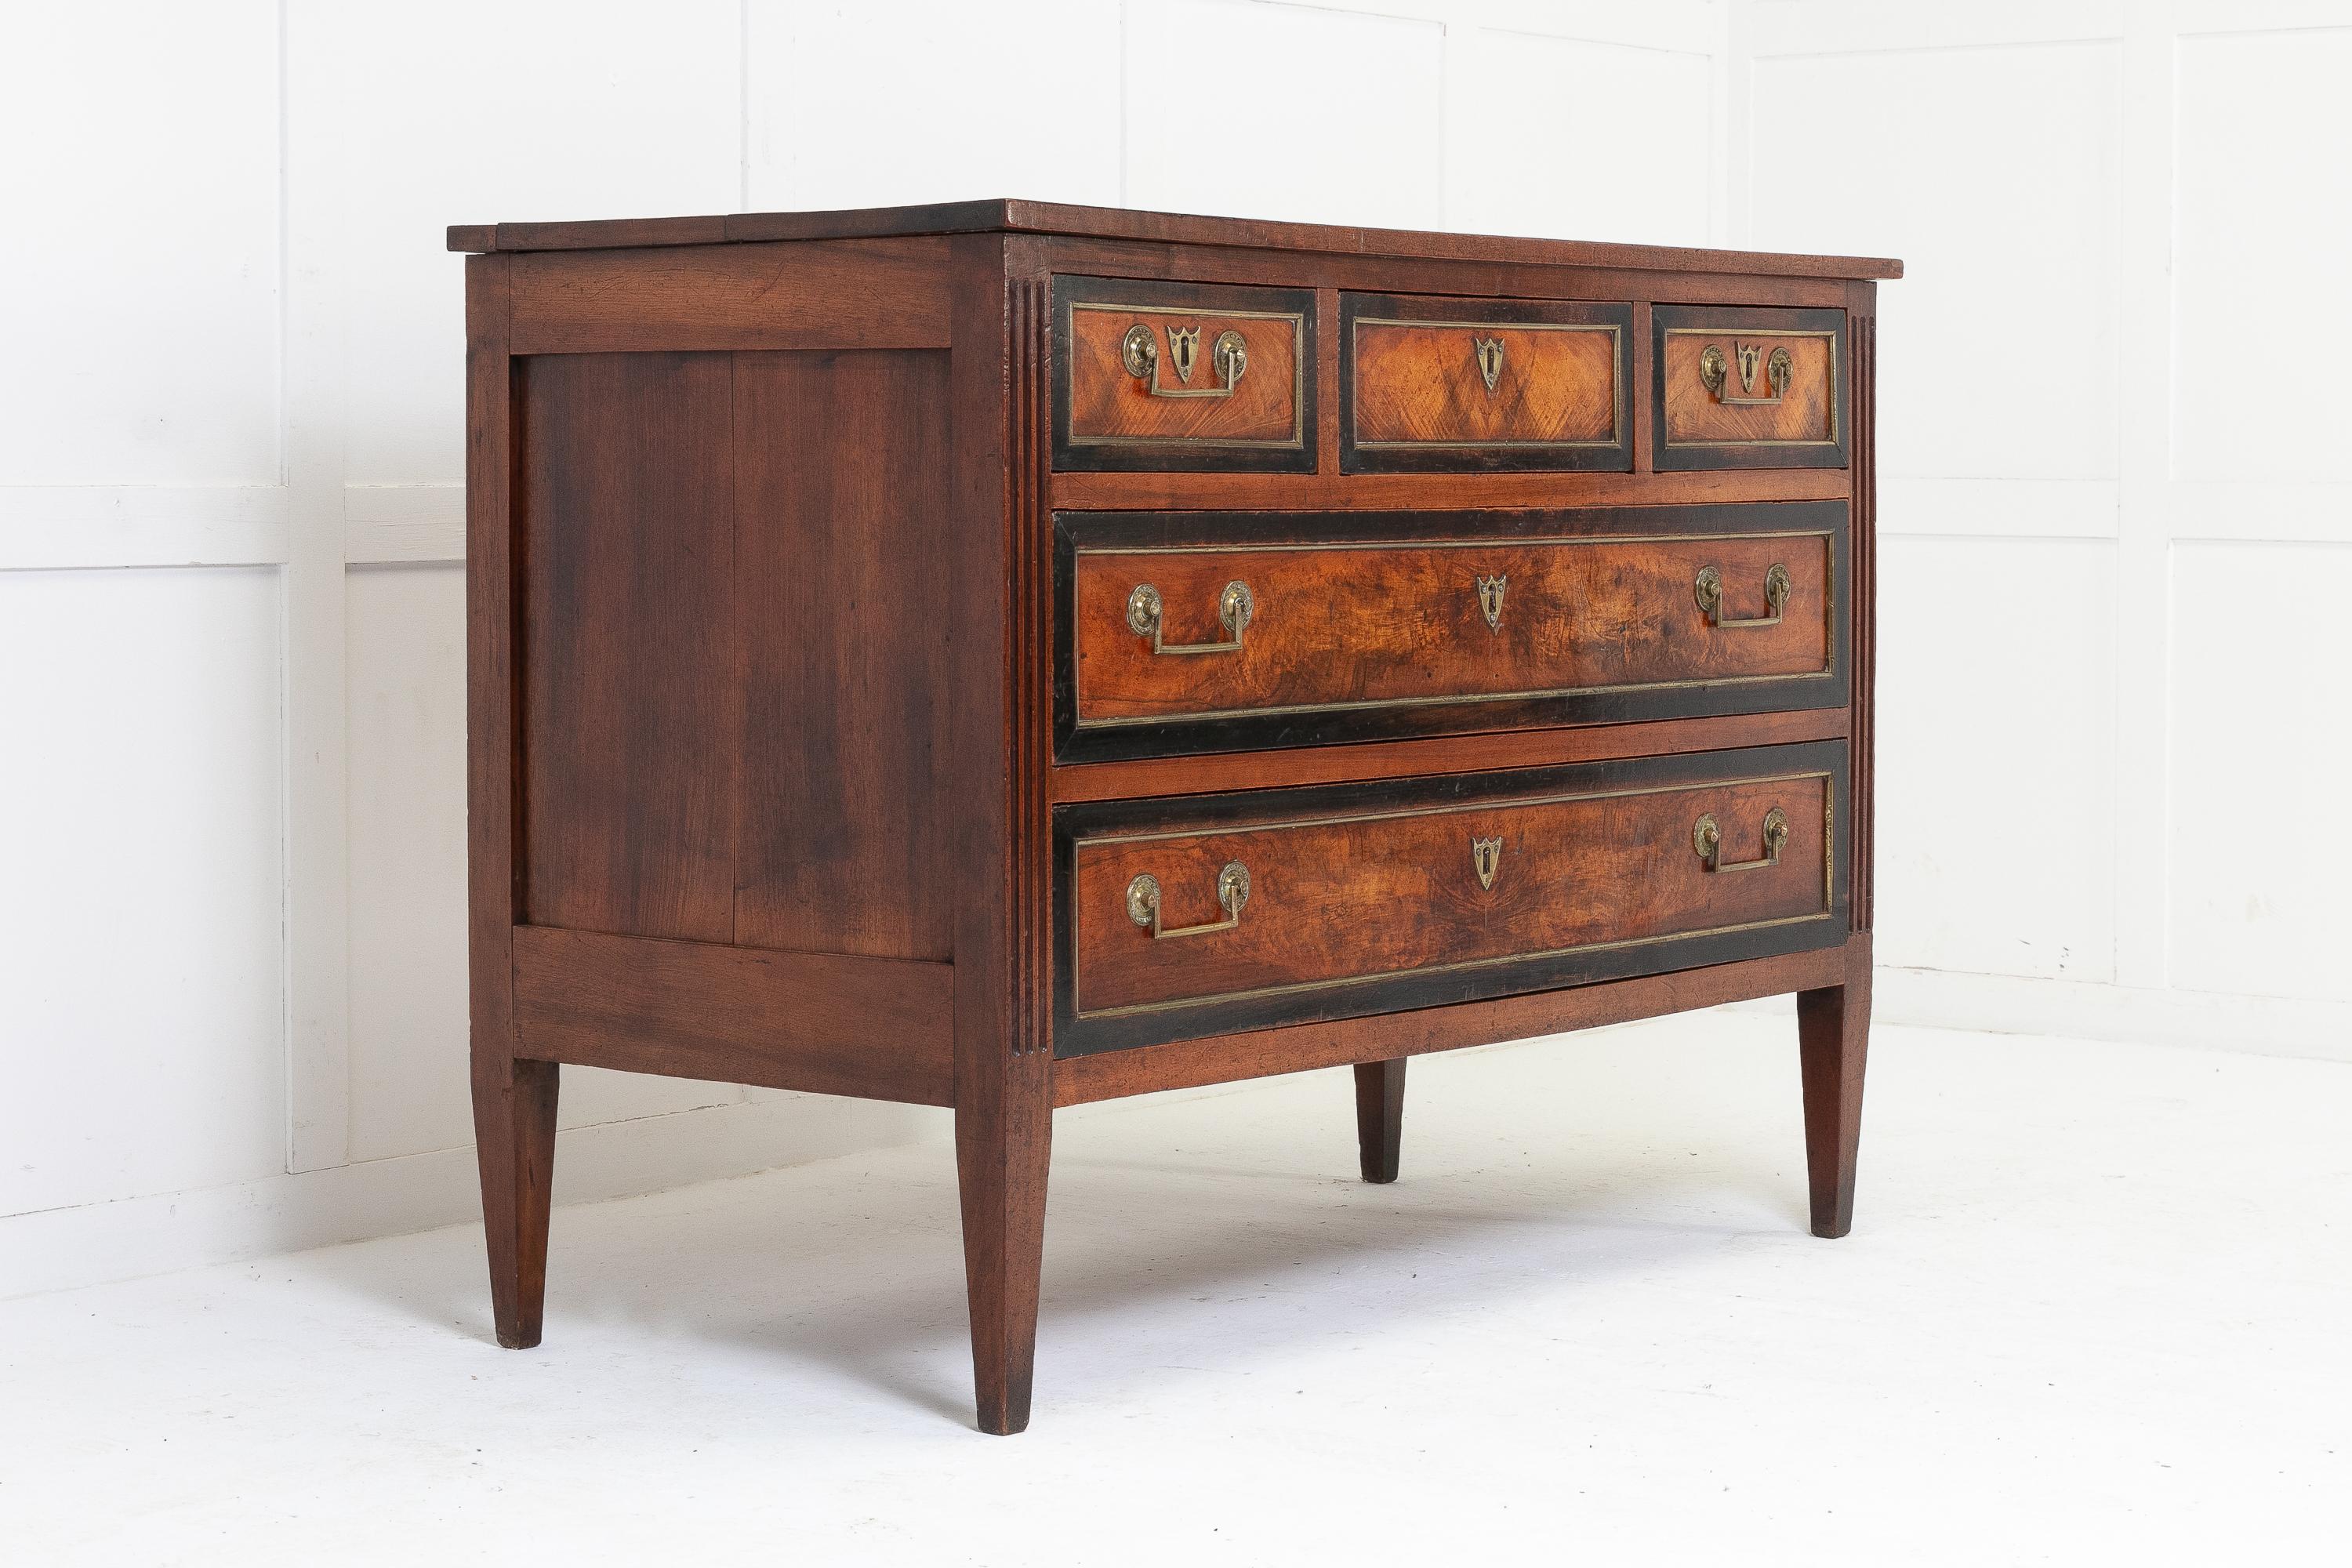 18th Century French mahogany commode retaining a beautiful rich colour. Having three small drawers over two long drawers, each drawer having ebonised banding and brass mouldings. Original drop bar handles and escutcheons. Standing on square tapering